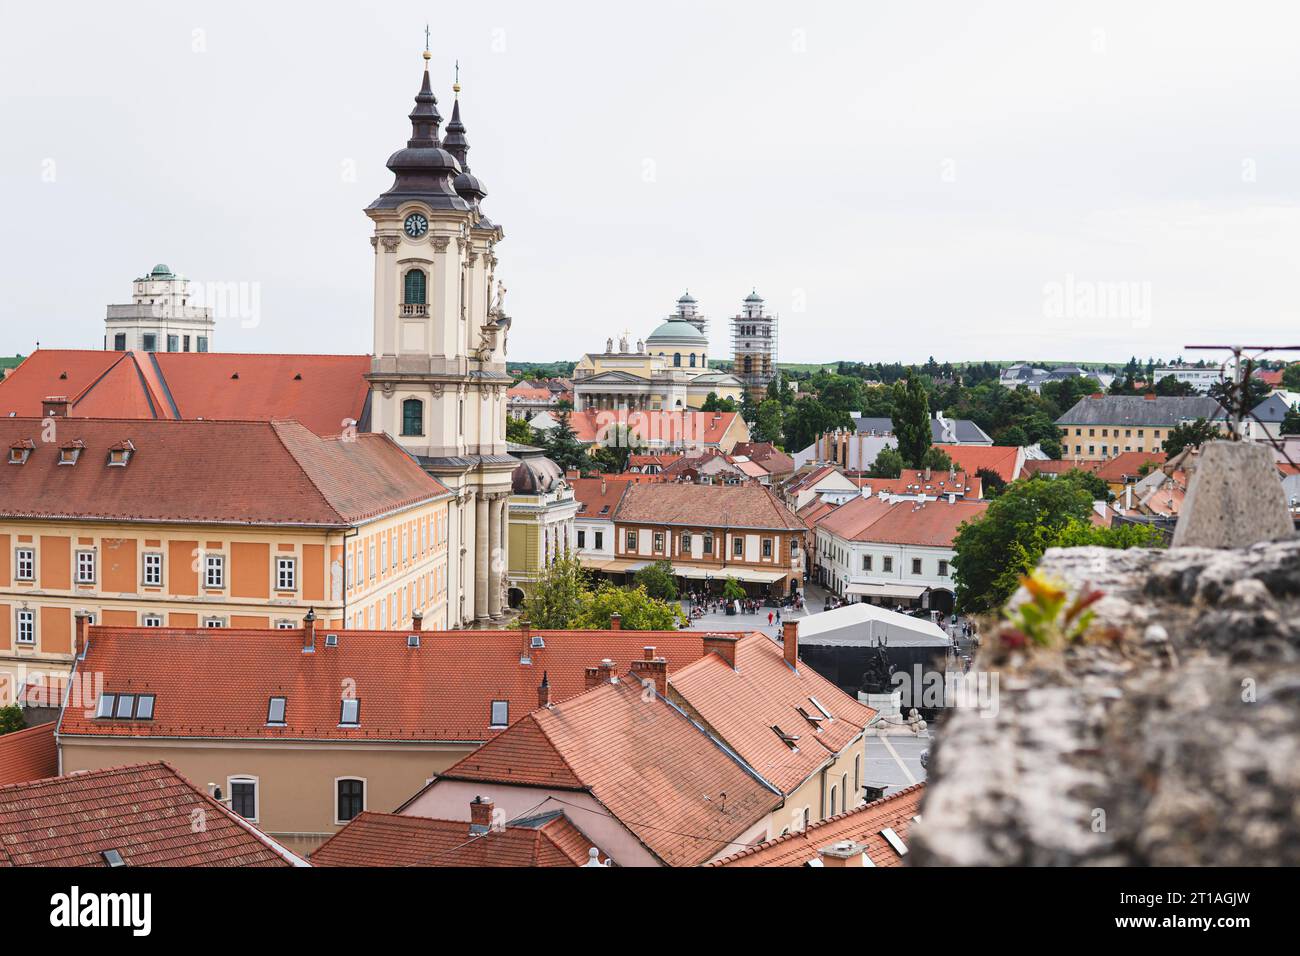 Saint Anthony of Padua church in Eger city in Hungary Stock Photo